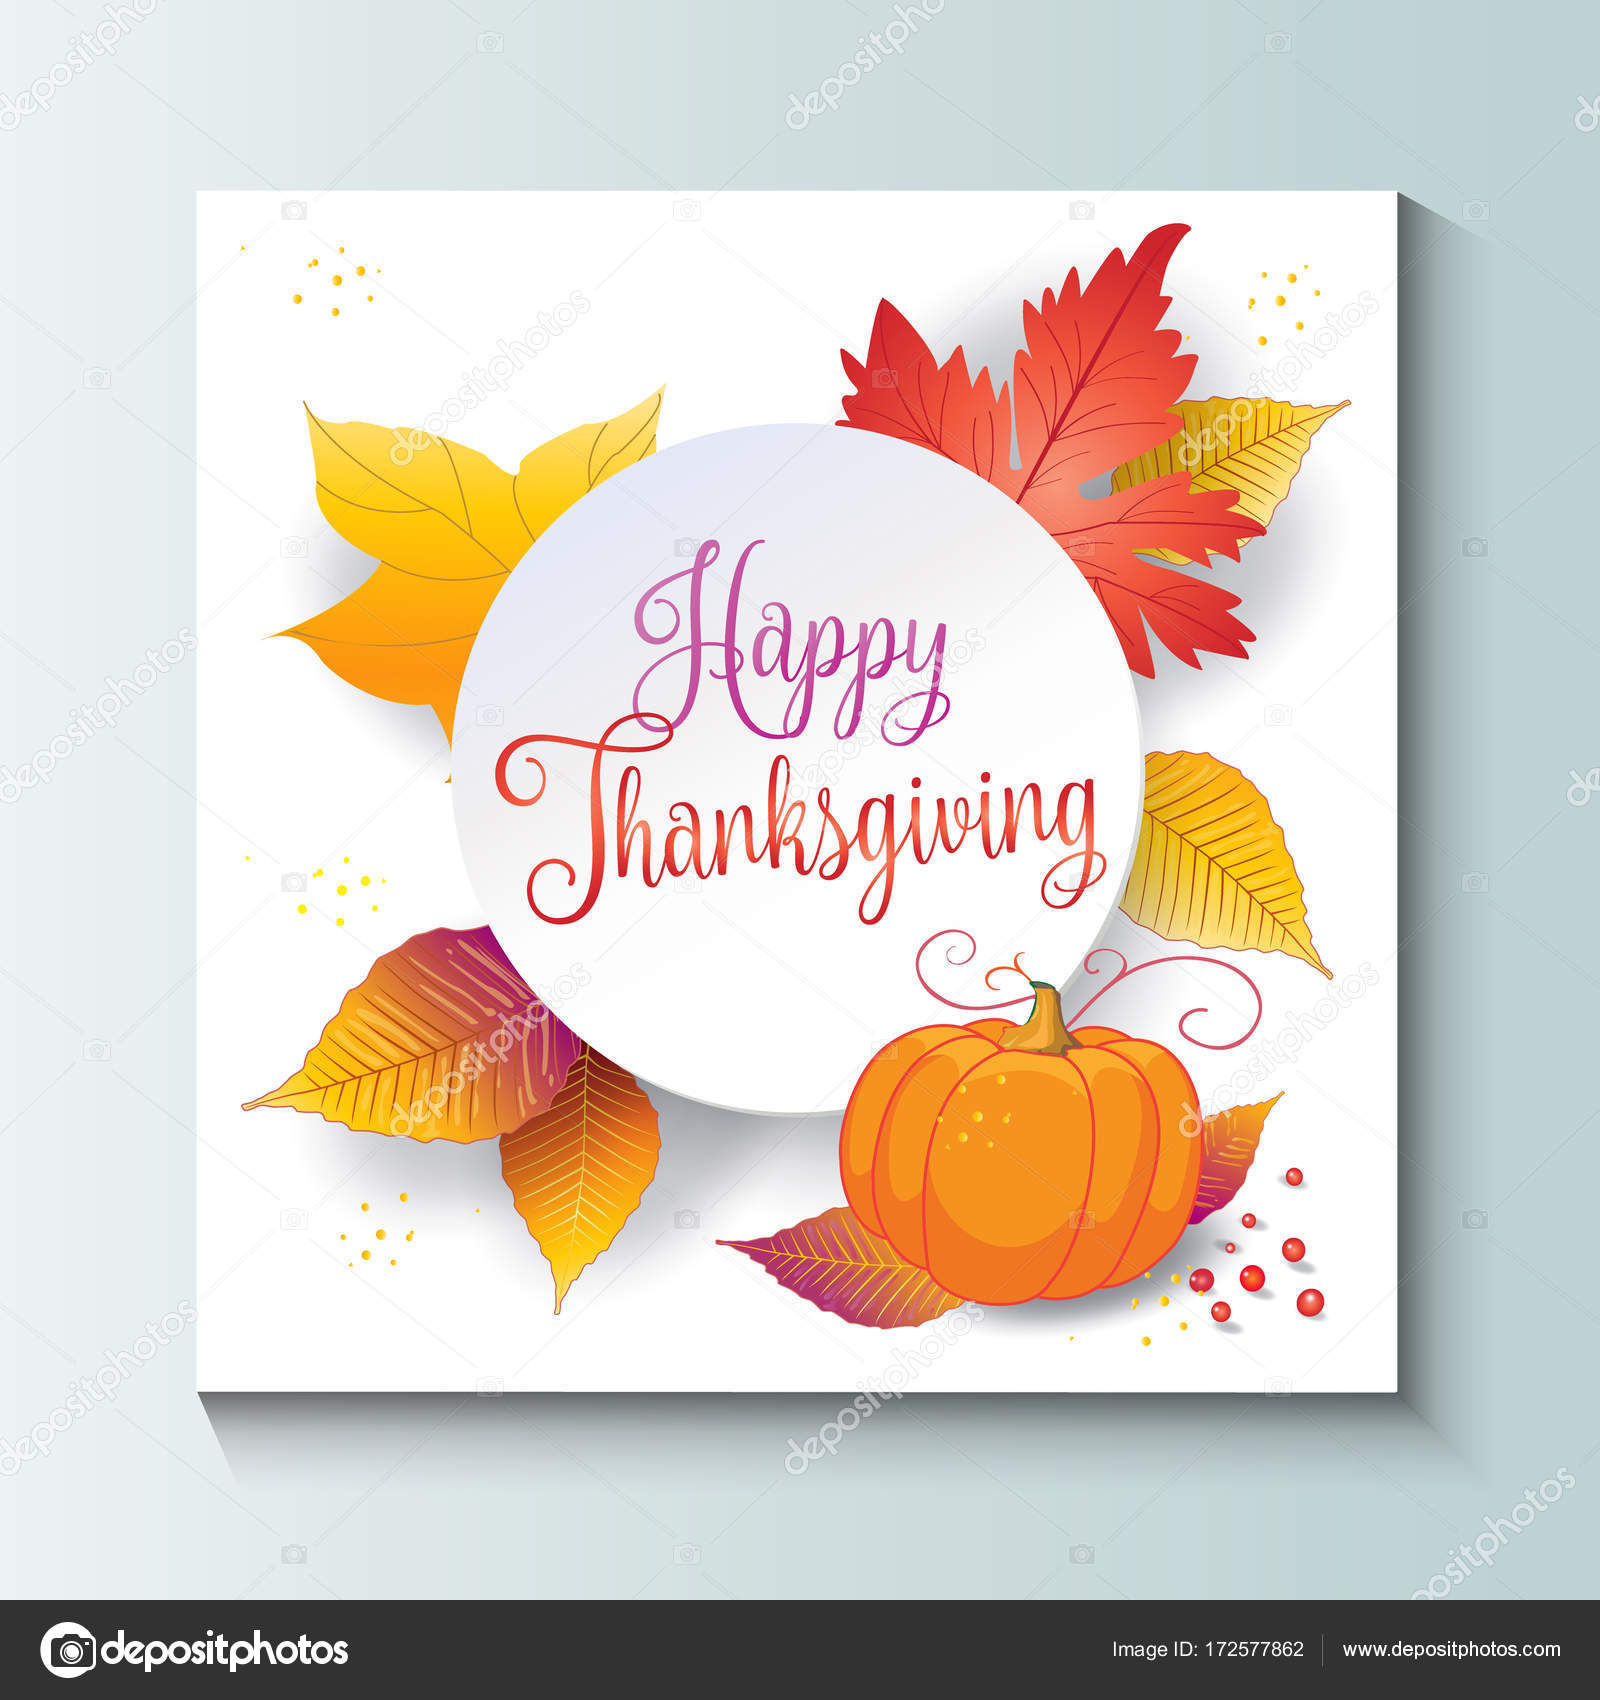 Happy Thanksgiving Holiday Wallpaper Fall Sales Season Thanksgiving Holiday Decoration Maple Leaves Lettering Water Drops On